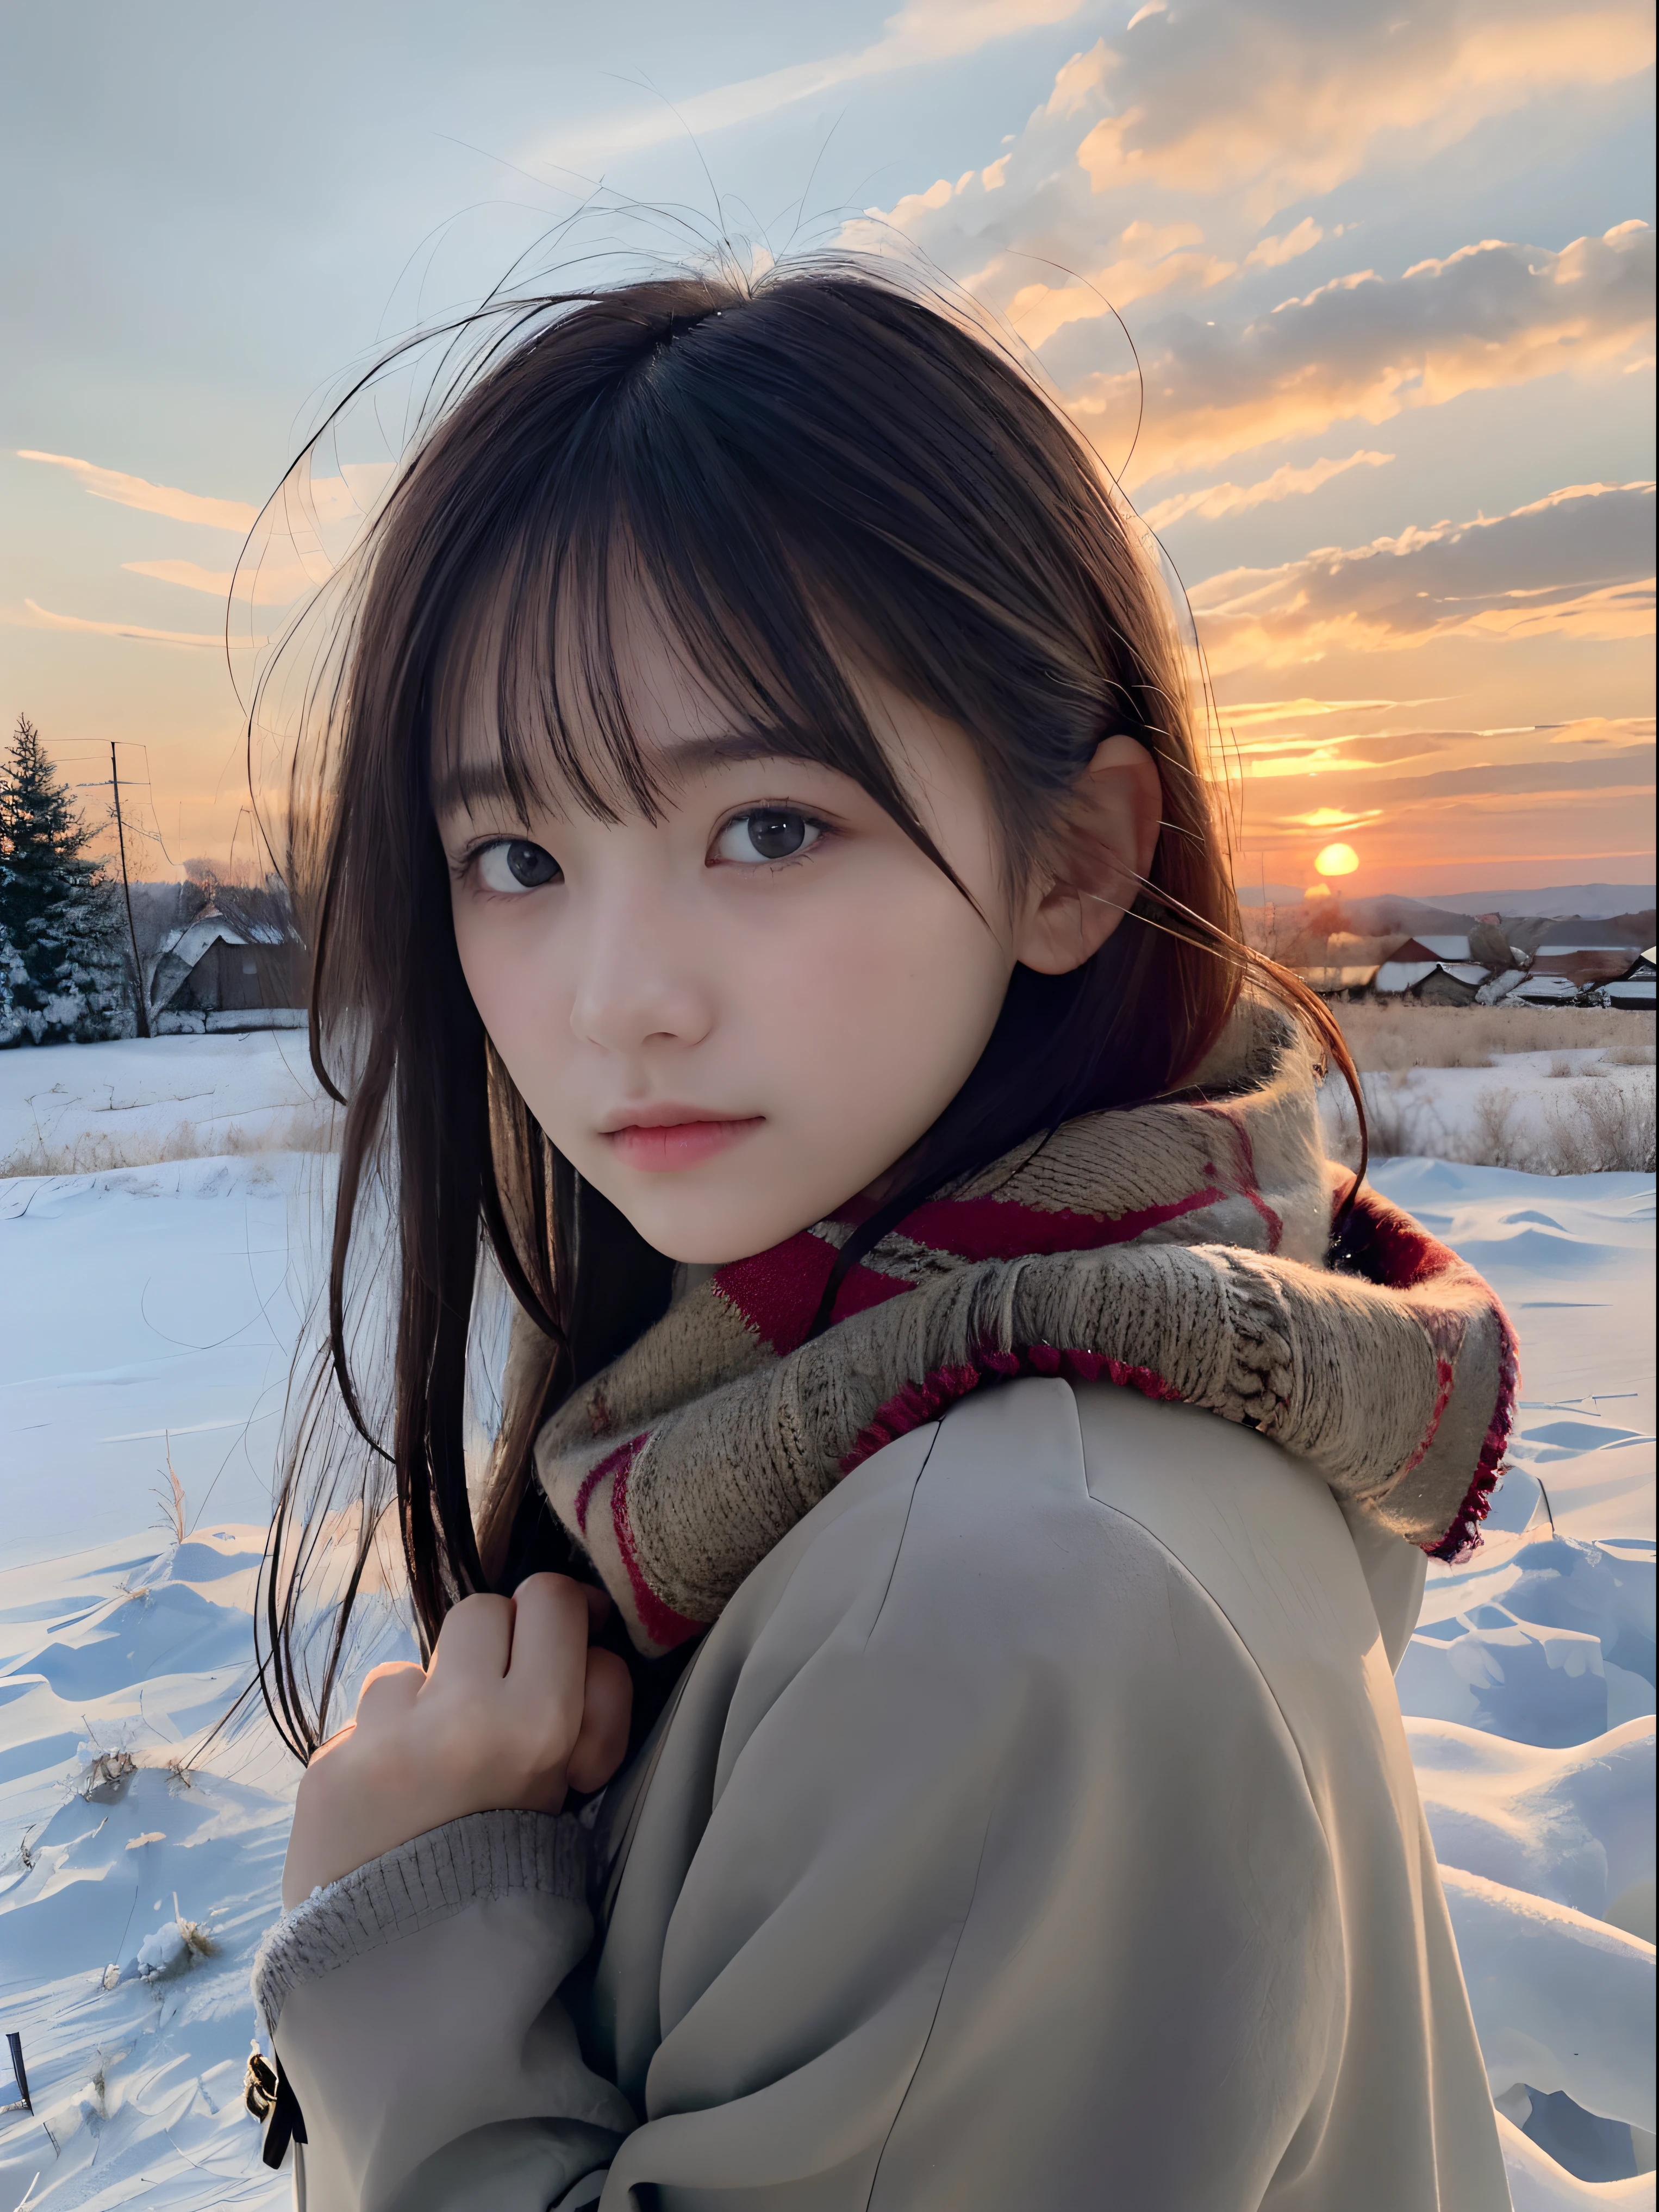 (Close up portrait of slender girl with long hair with dull bangs in winter uniform with winter coat and scarf :1.5)、(The girl looks back with a sad face:1.5)、(Girl's hair fluttering in the wind:1.5)、(Big sunset red sky covered with beautiful snow:1.5)、(Perfect Anatomy:1.3)、(No mask:1.3)、(complete fingers:1.3)、Photorealistic、Photography、masutepiece、top-quality、High resolution, delicate and pretty、face perfect、Beautiful detailed eyes、Fair skin、Real Human Skin、pores、((thin legs))、(Dark hair)